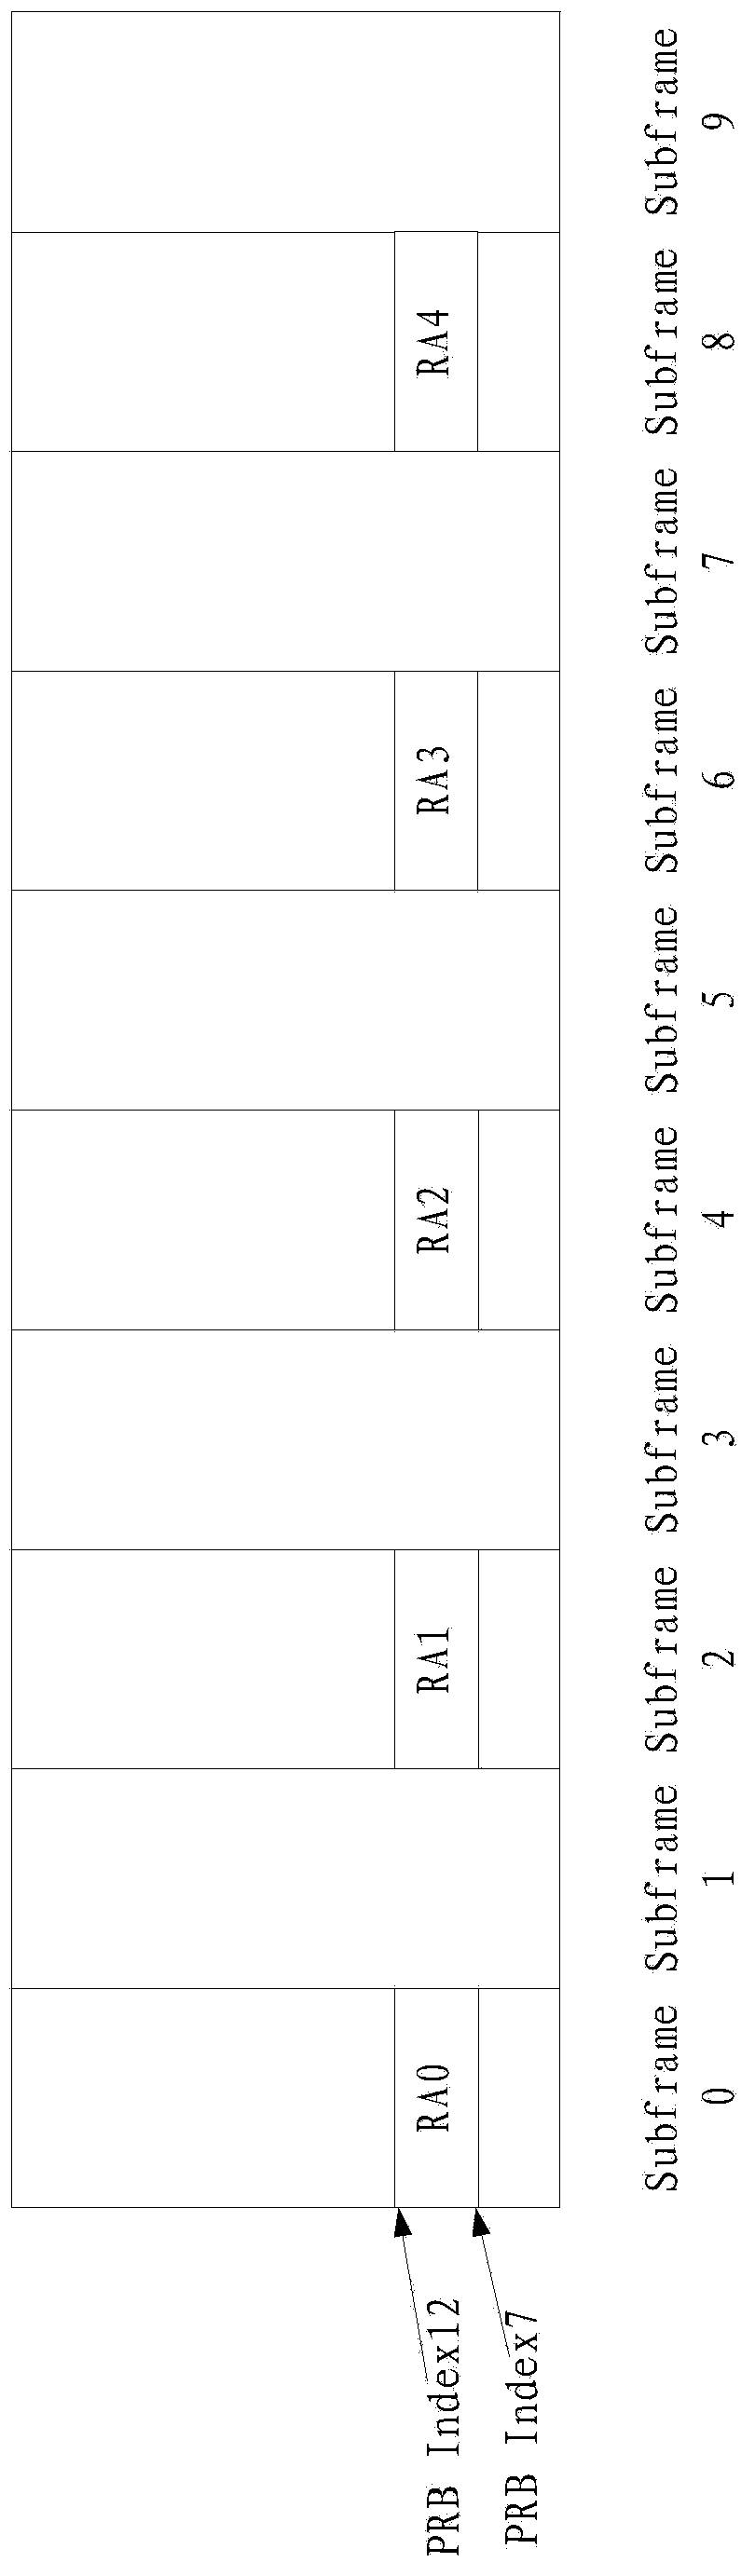 Random access channel resource configuration method and system